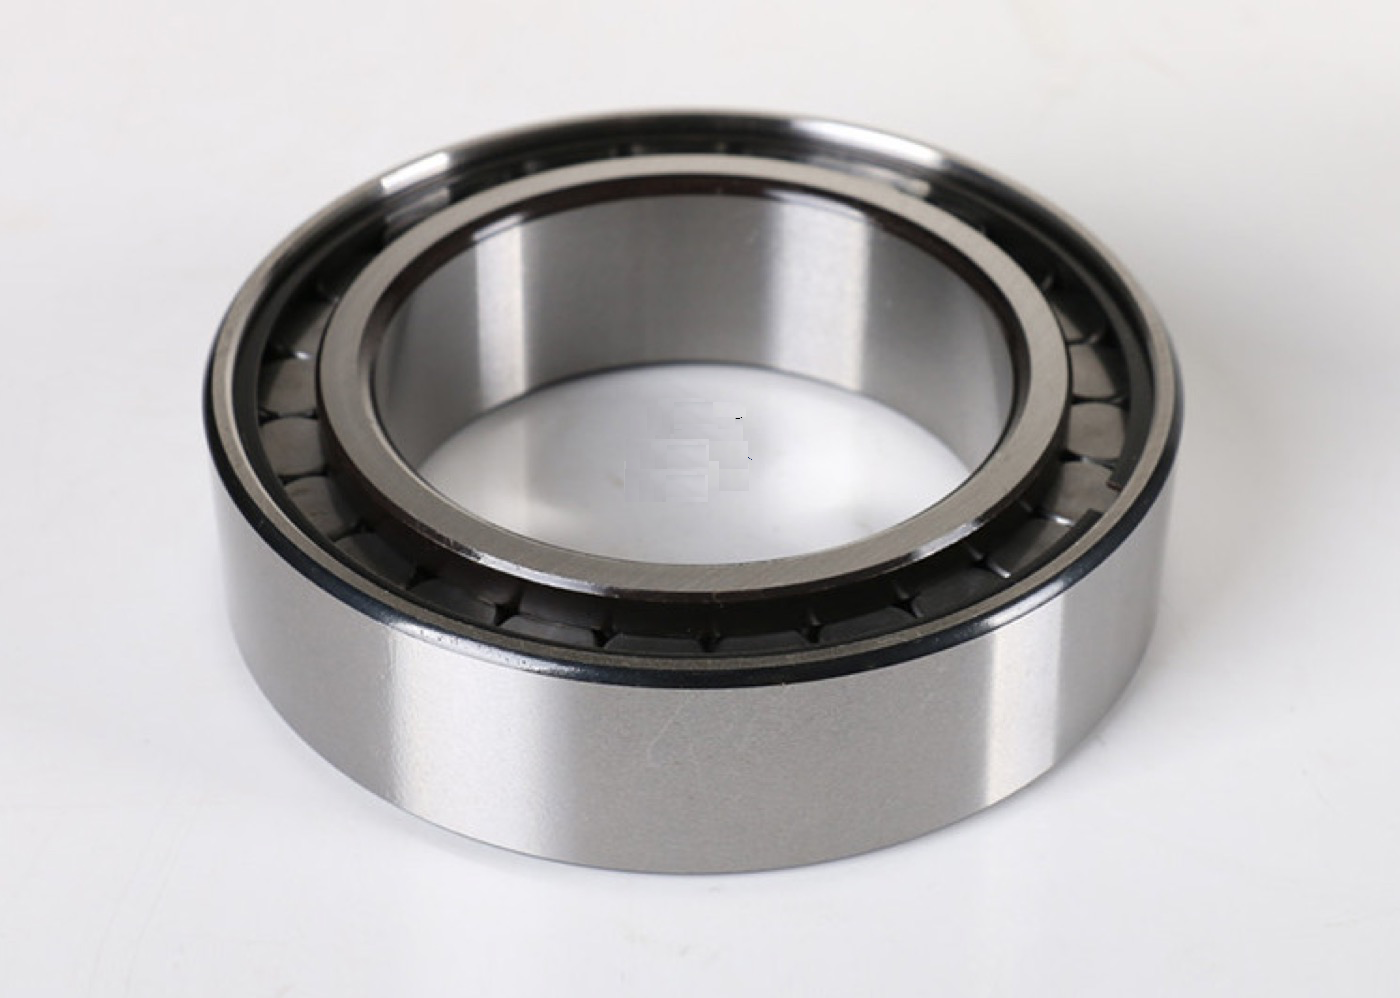 SL045020PP GENERIC 100x150x67 Full compliment metric cylindrical roller bearing with 2 rubber seals Thumbnail